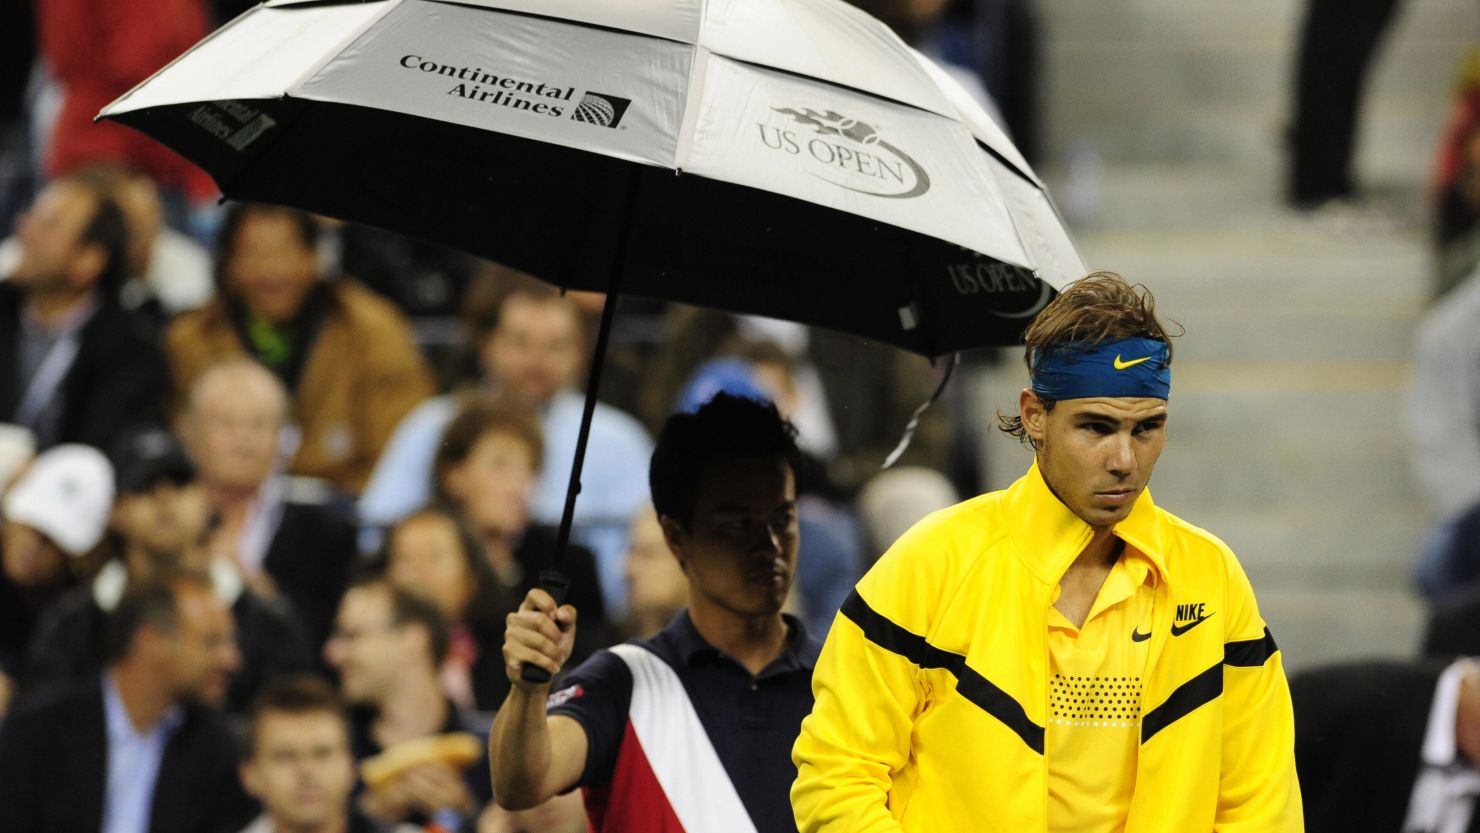 Rain soon won't be an issue at the U.S. Open after organizers said two retractable roofs would be in place. 